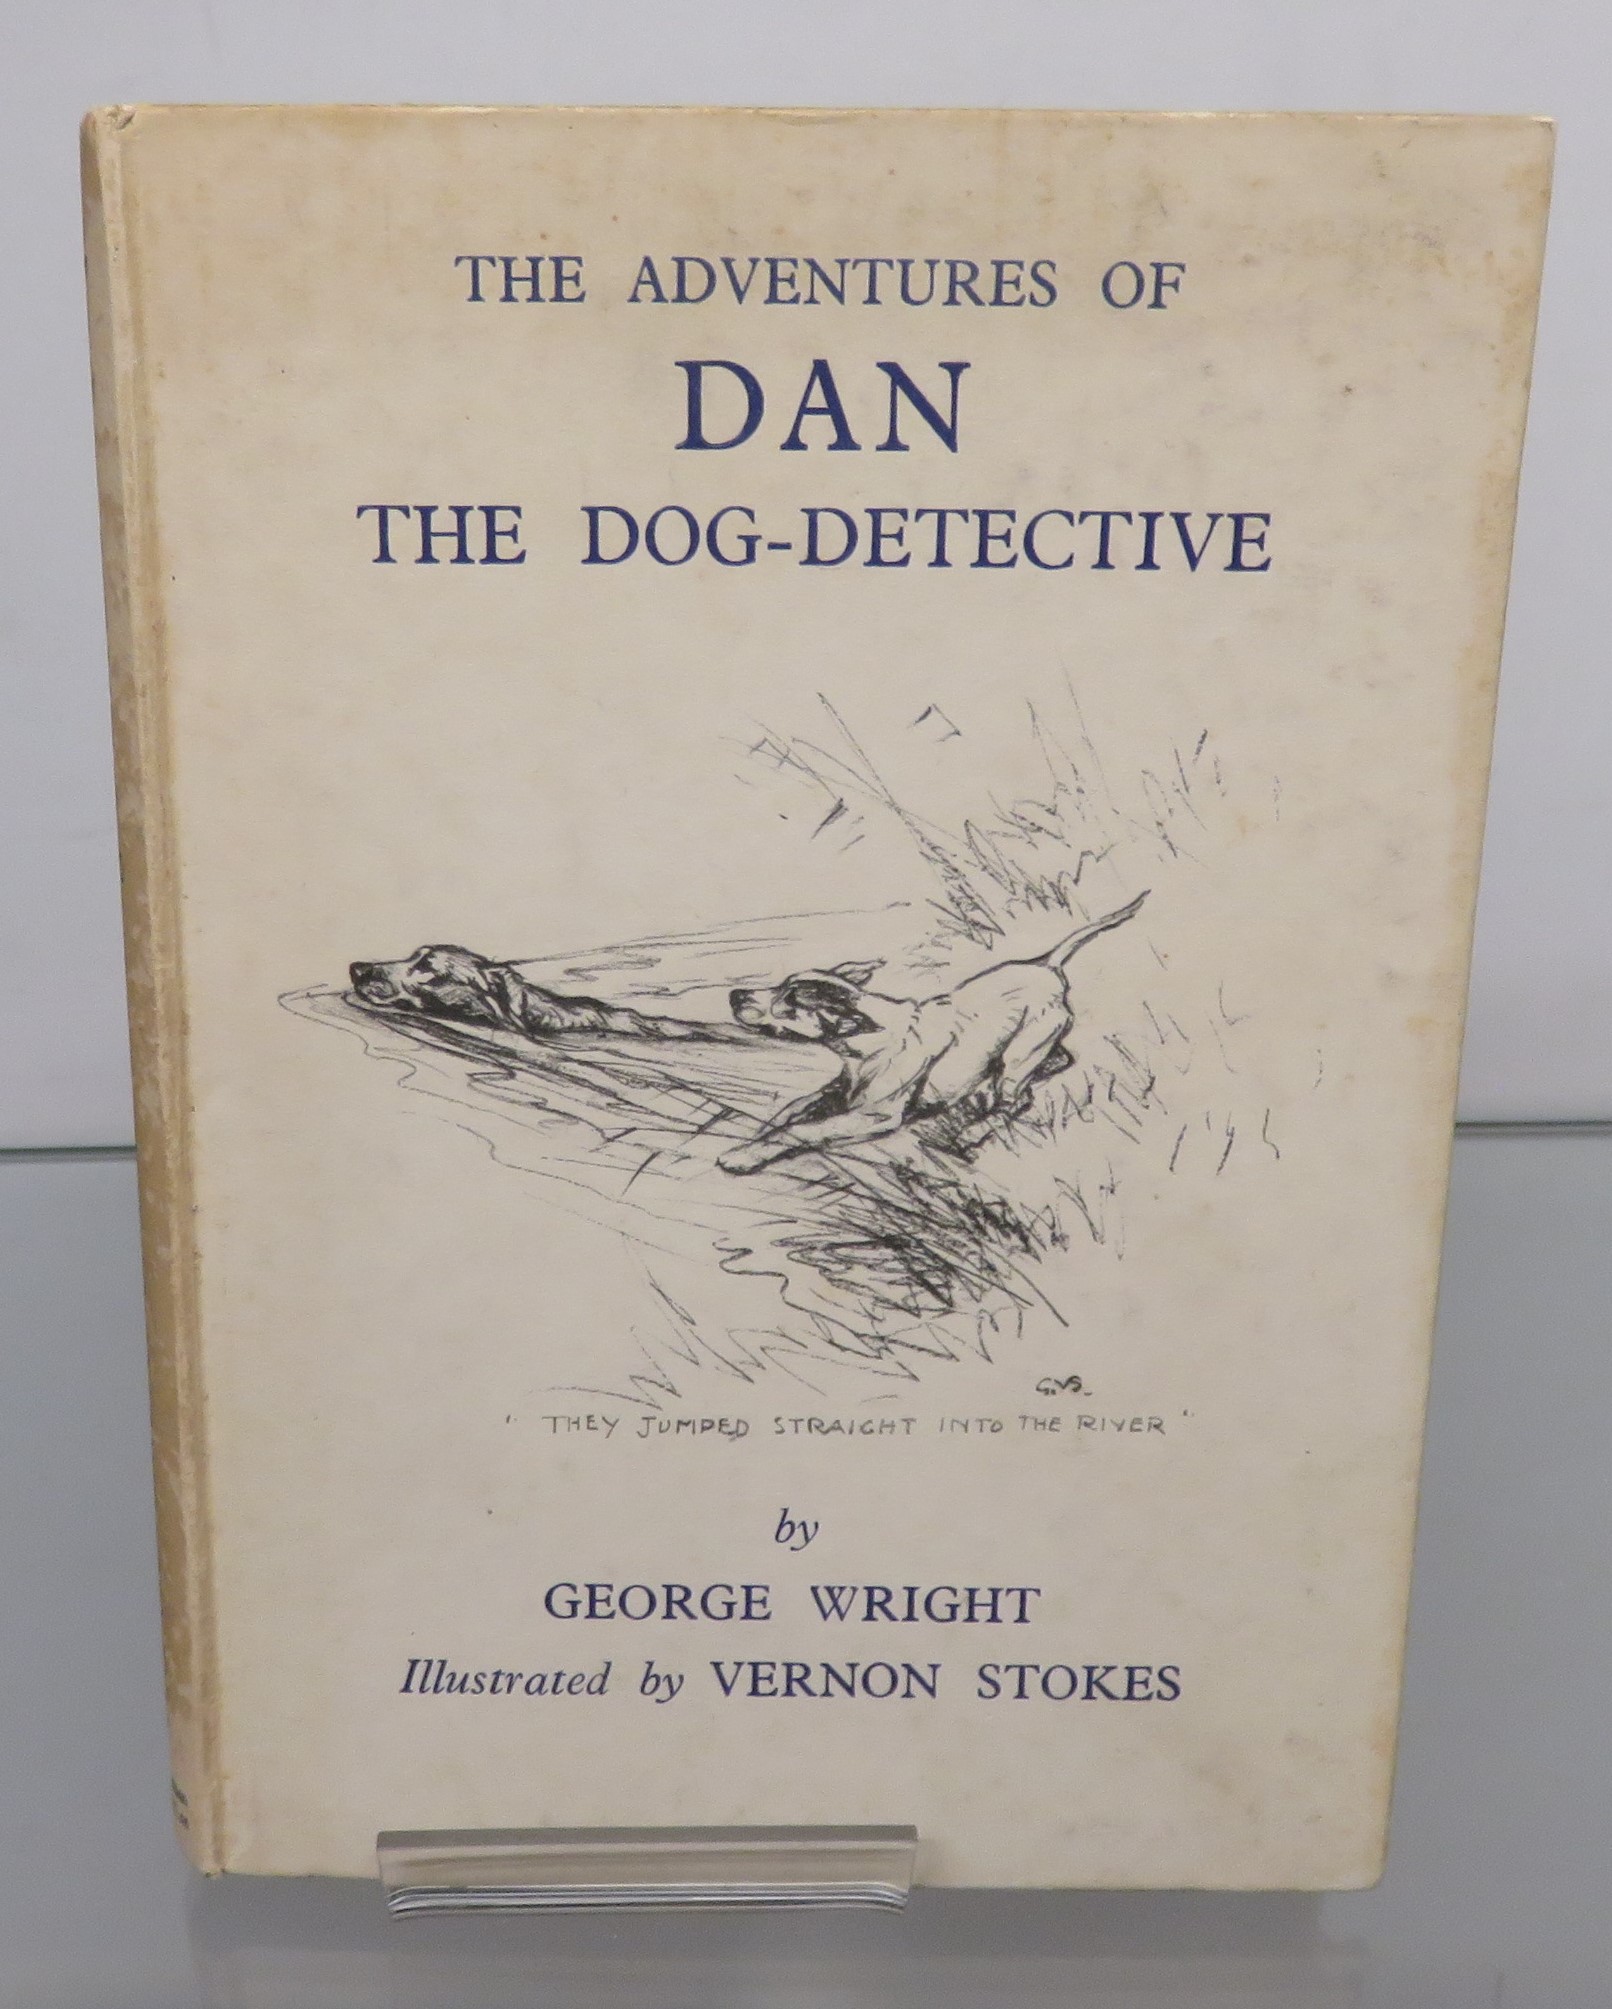 The Adventures of Dan The Dog-Detective